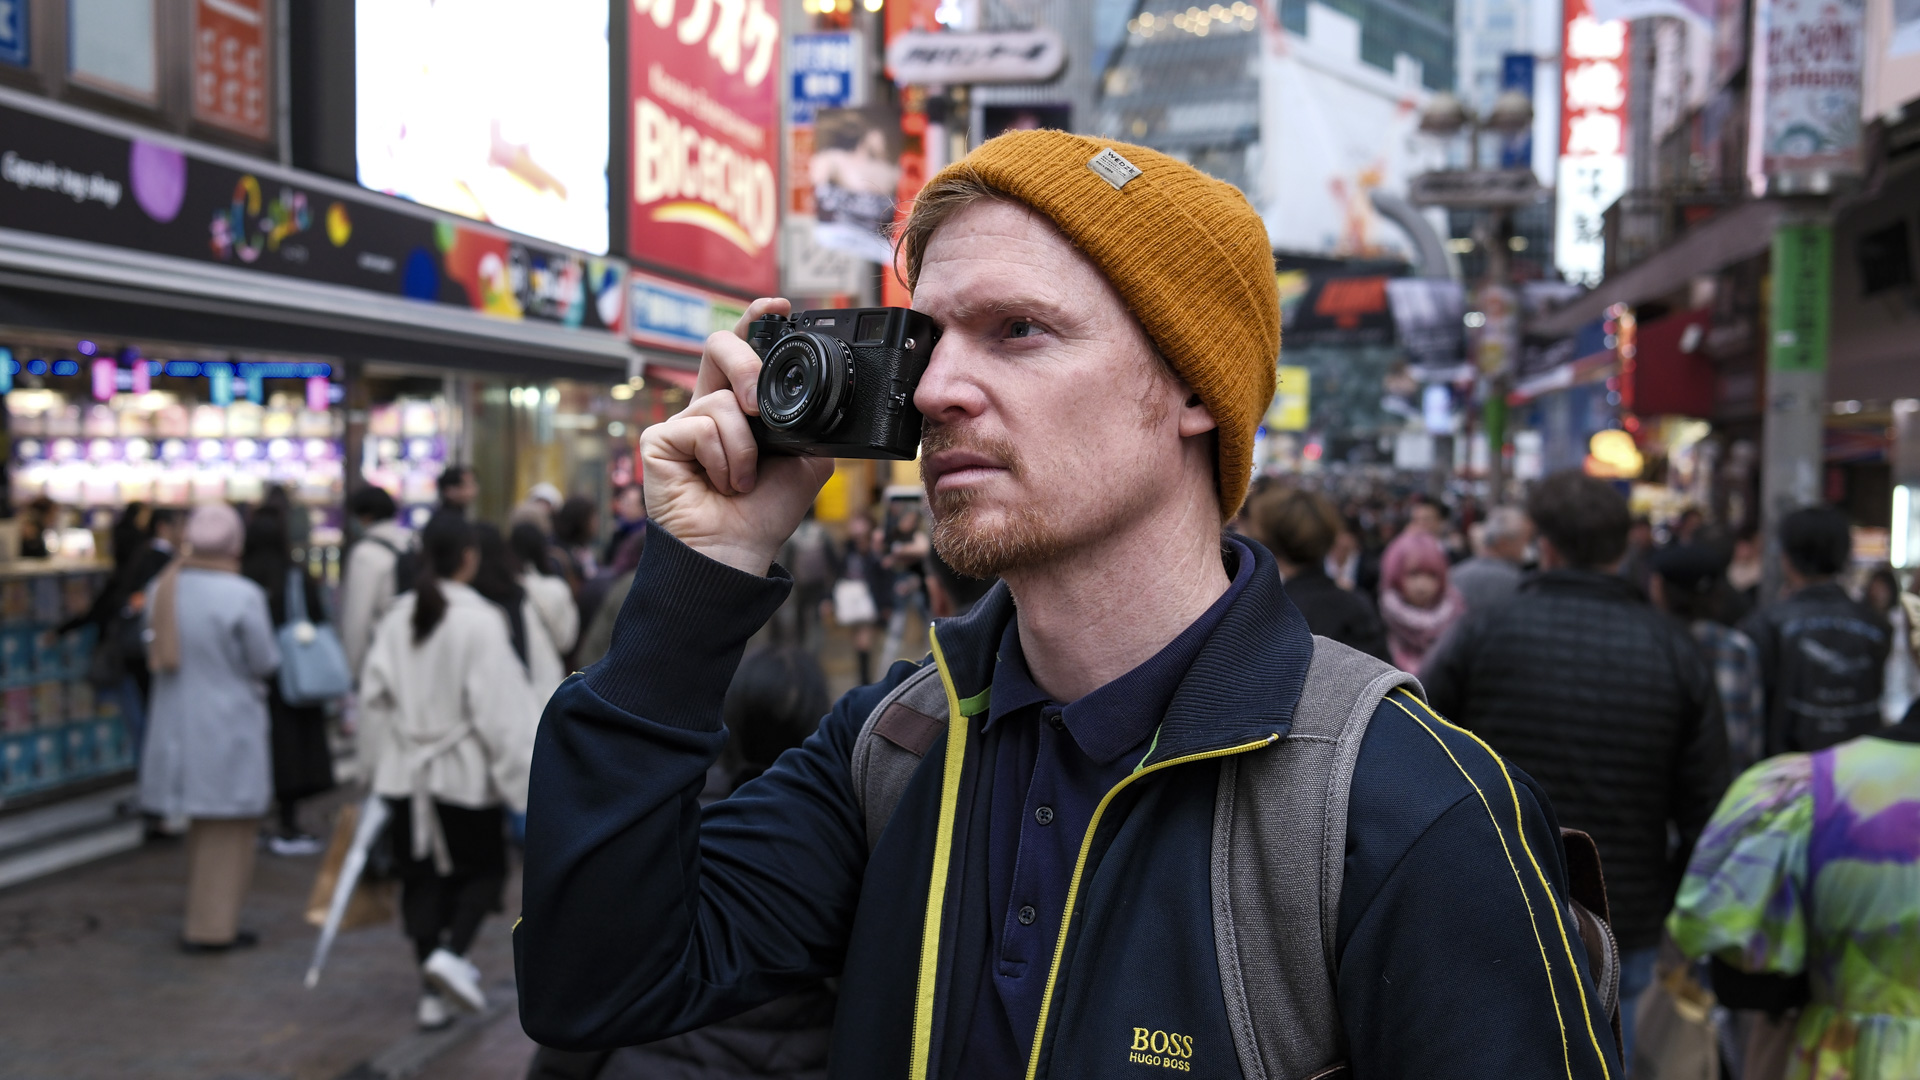 Fujifilm X100VI camera held up to photographer's eye on the streets of Tokyo